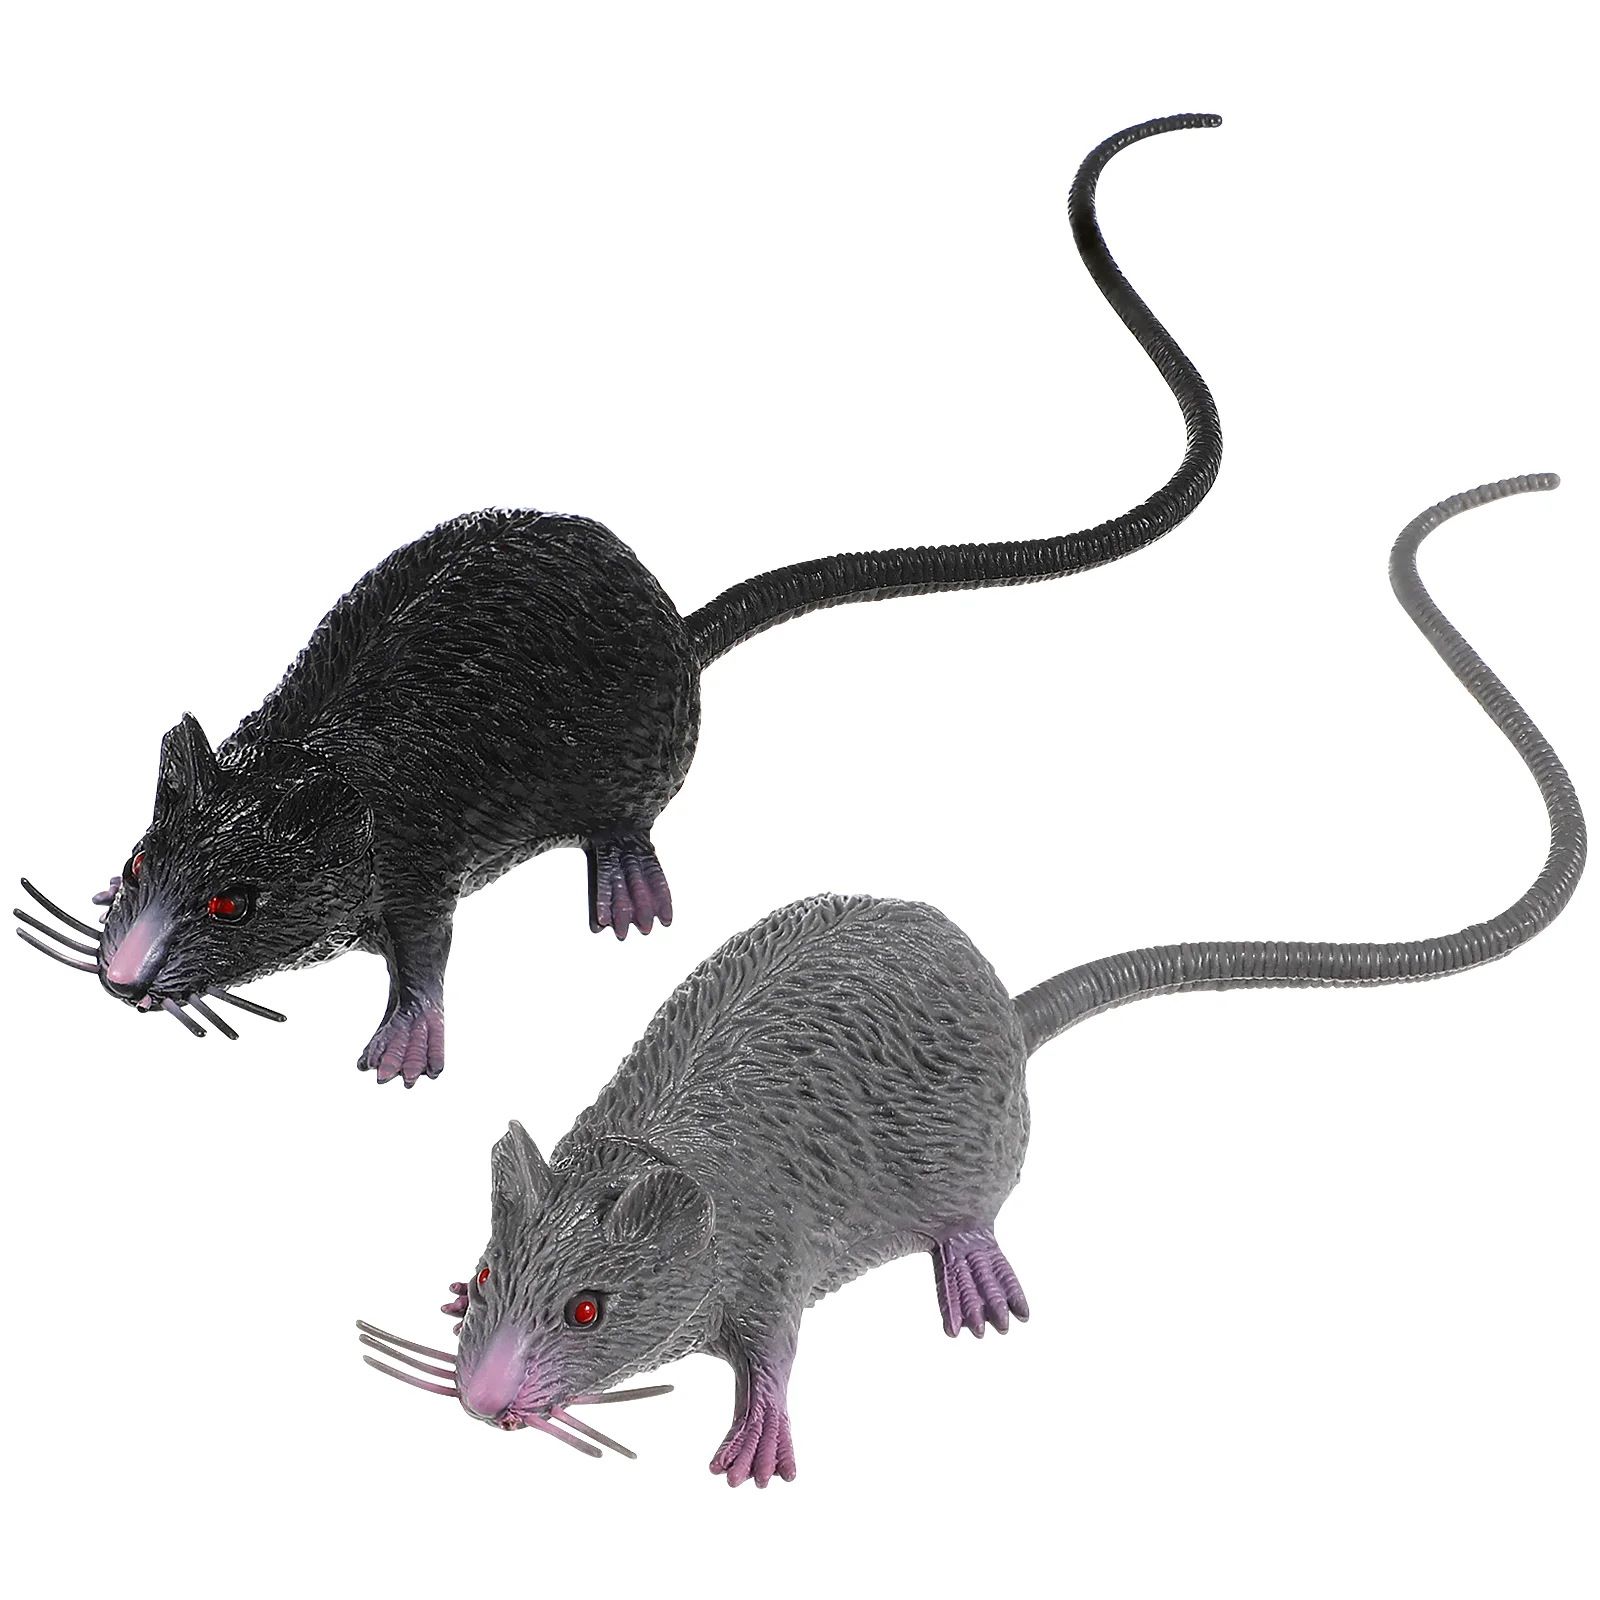 

2pcs Mice Mice Squeaking Rat Rat Spooky Scary Creepy Party Favors Trick Christmas gift